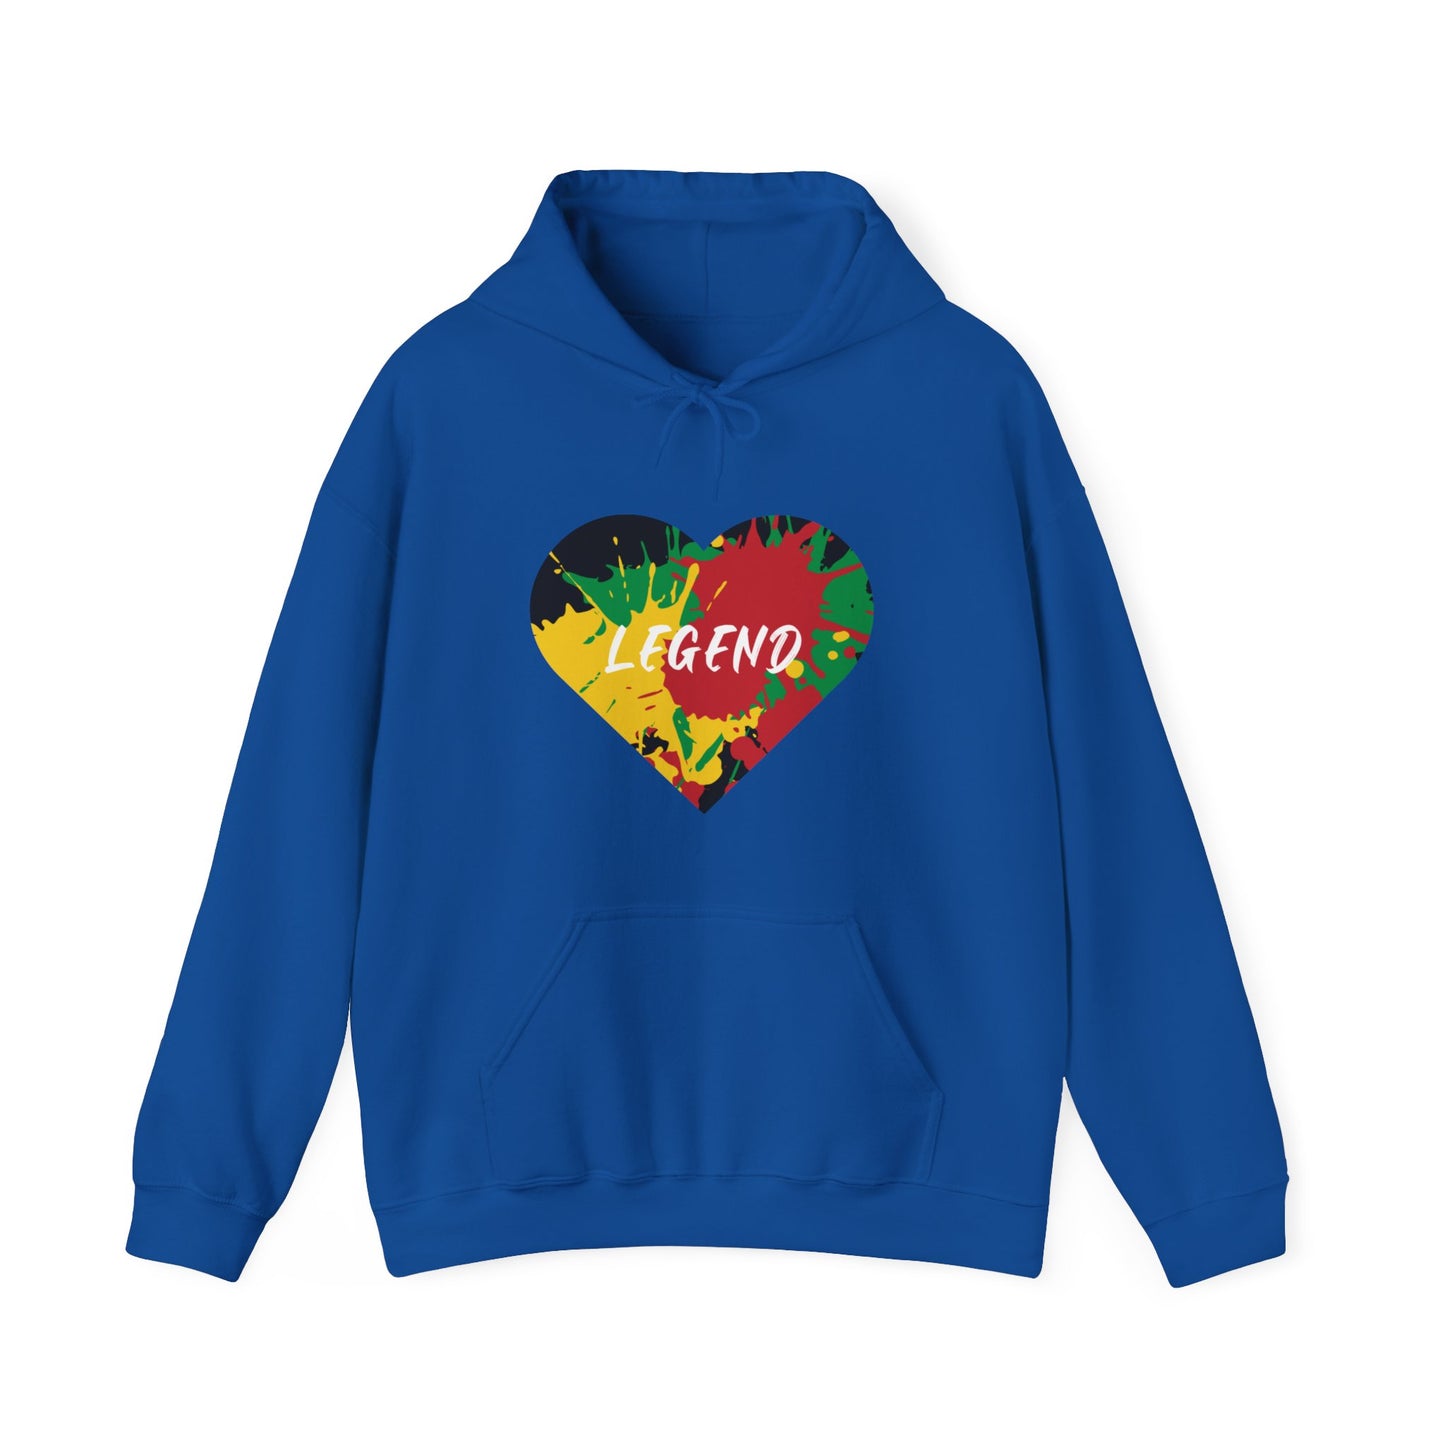 LEGEND ROOTS COLOR GRAPHIC ART DESIGN HOODIE GIFT